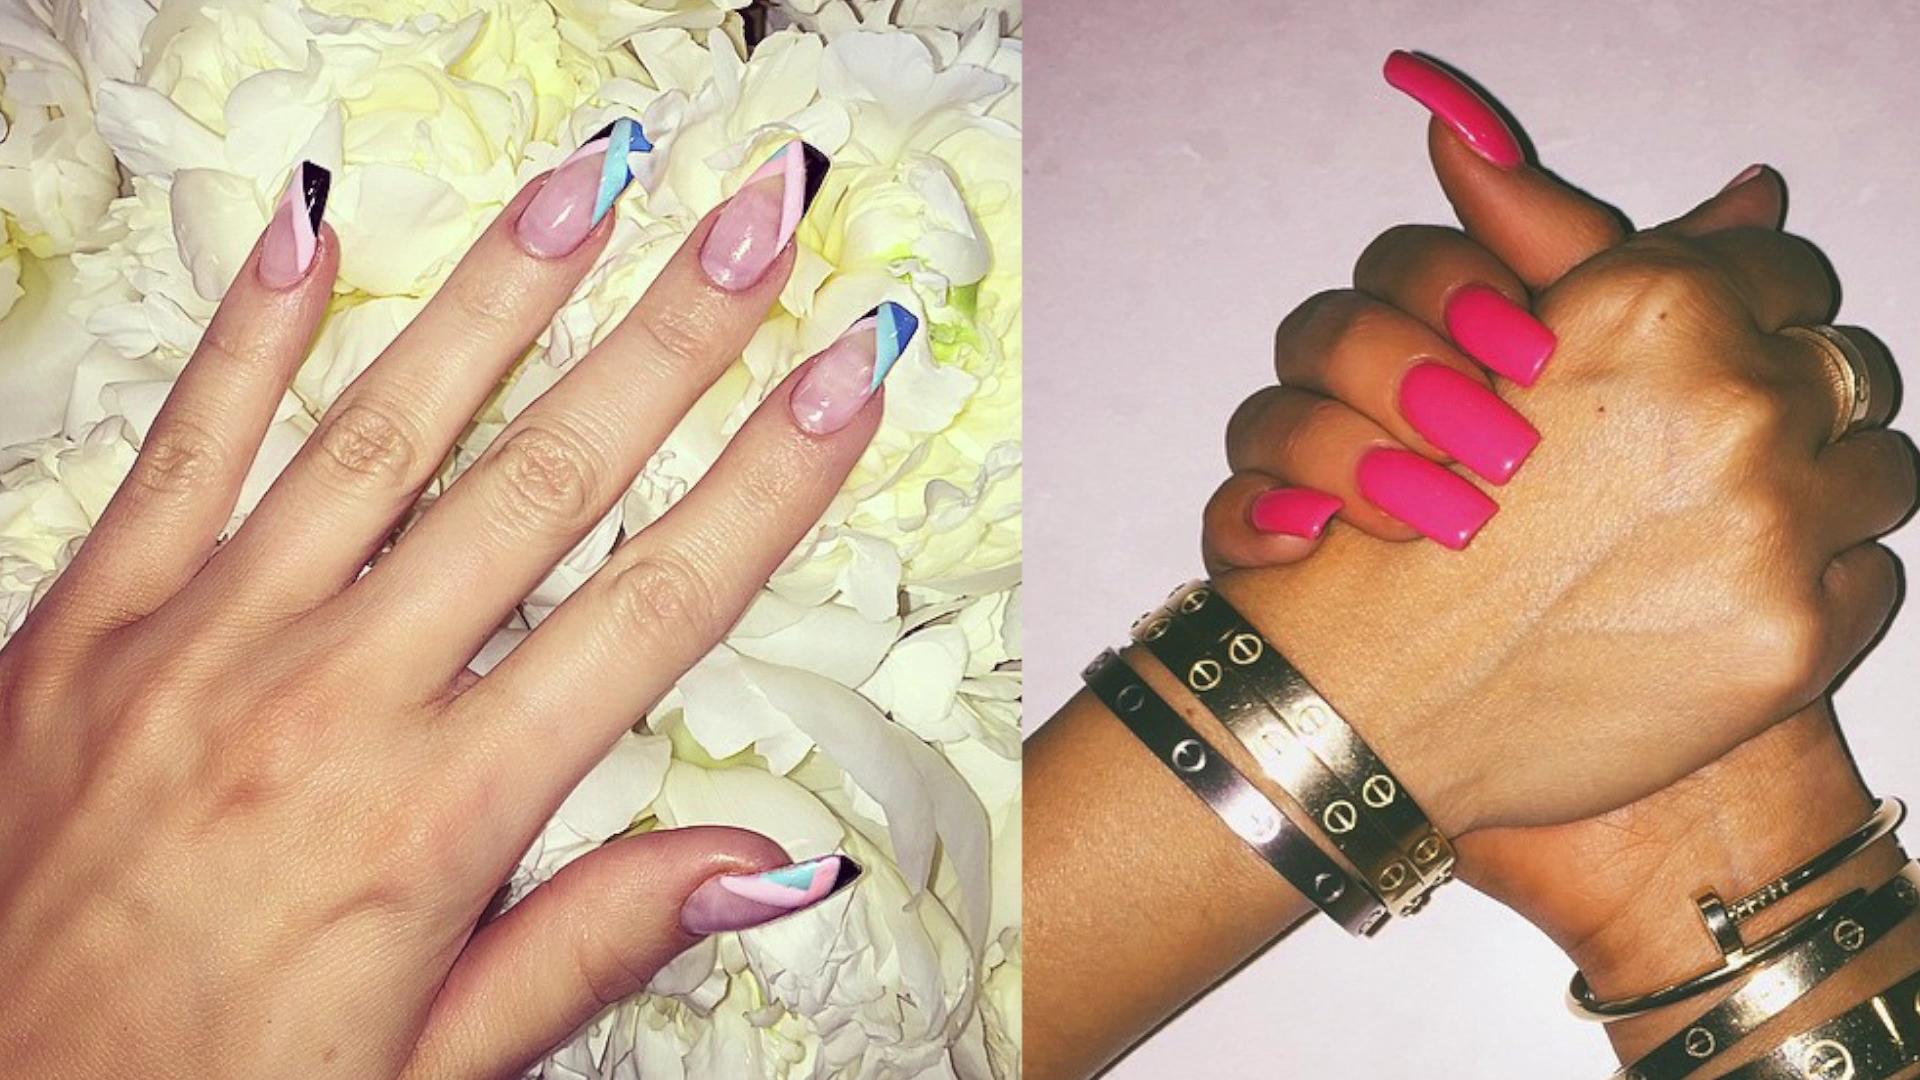 Gel Manicures: The Benefits, Cost, and How Long They Last